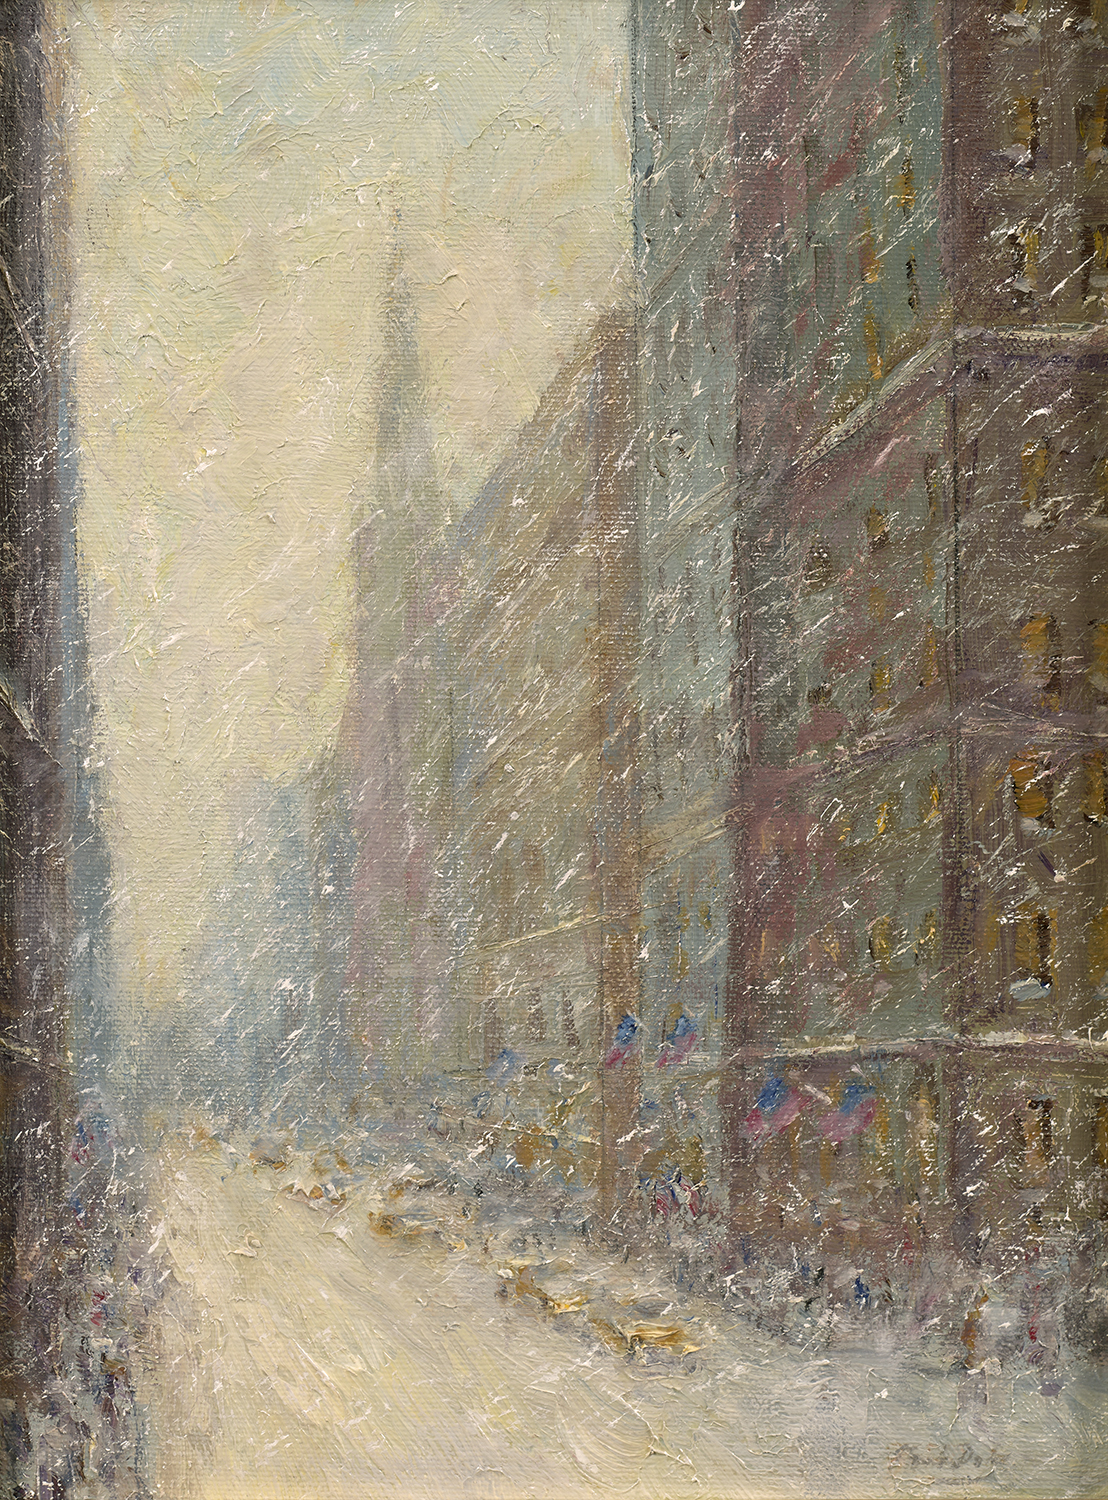 mark_daly_md1097_winter_in_the_city.jpg